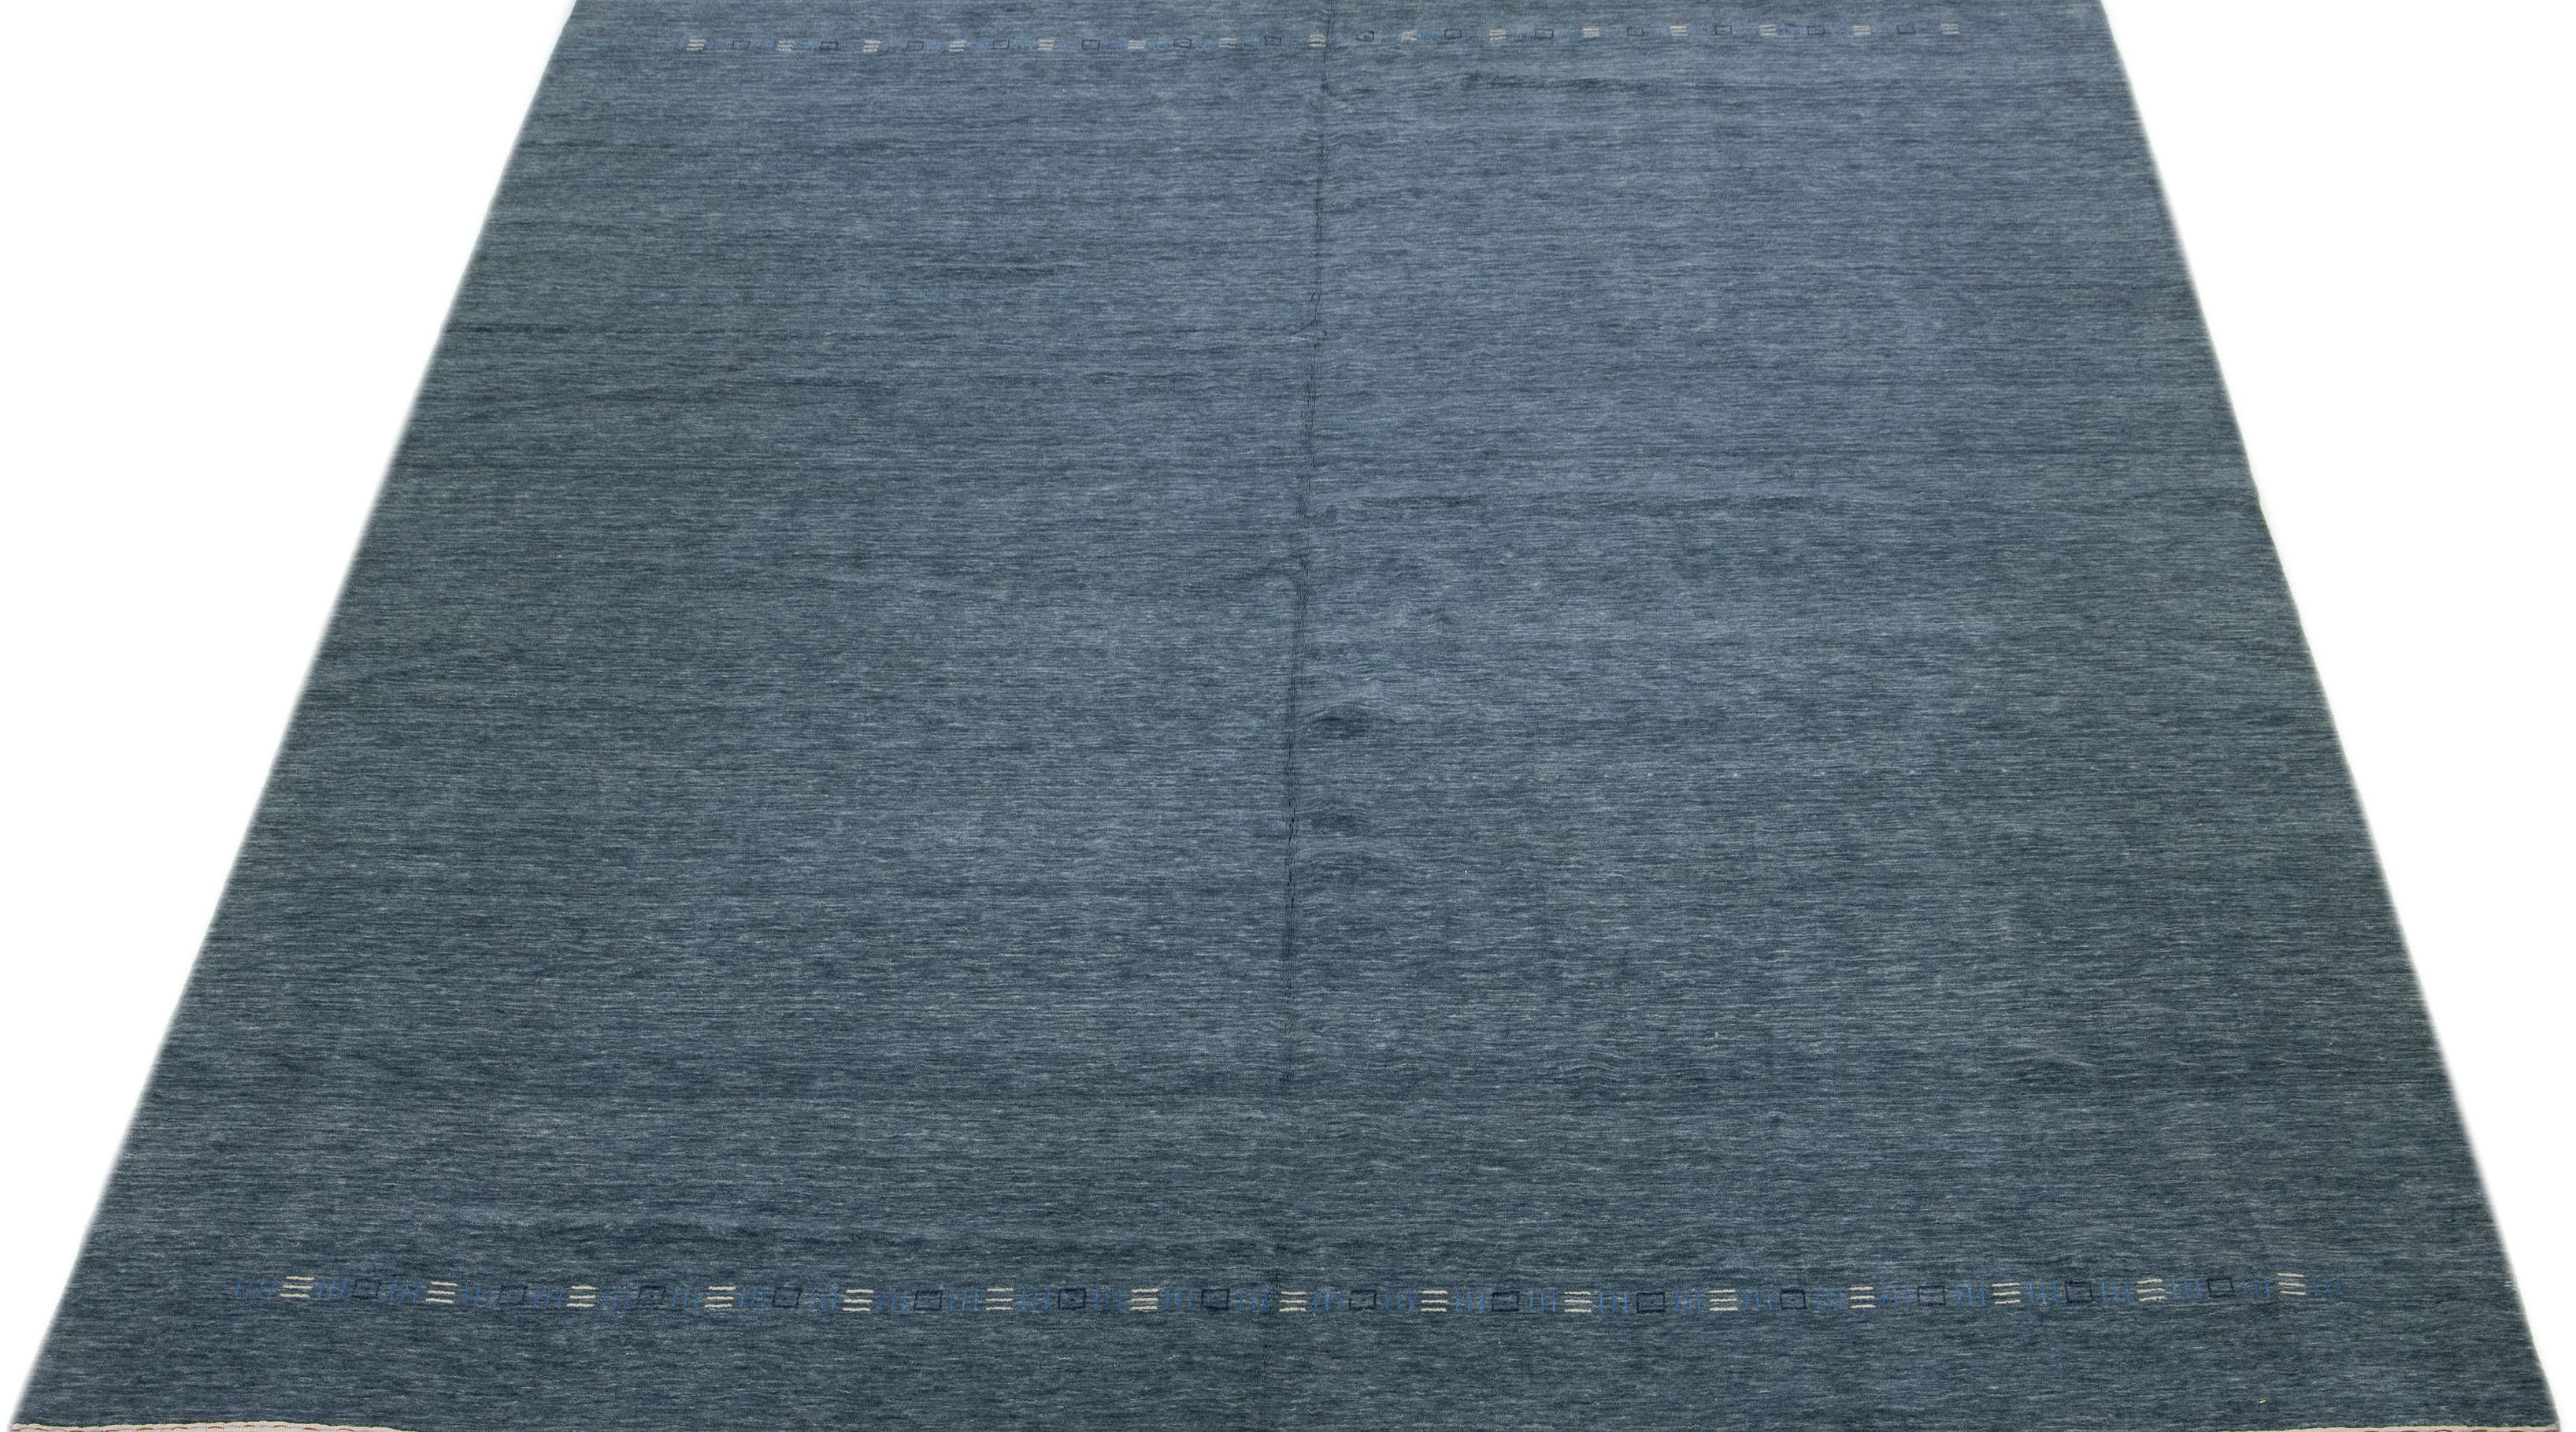 This wool rug is handcrafted in the Gabbeh style and features a sophisticated minimalist design. Its dark blue field provides a stunning backdrop for the subtle blue and white accents.

This rug measures 12' x 14'9